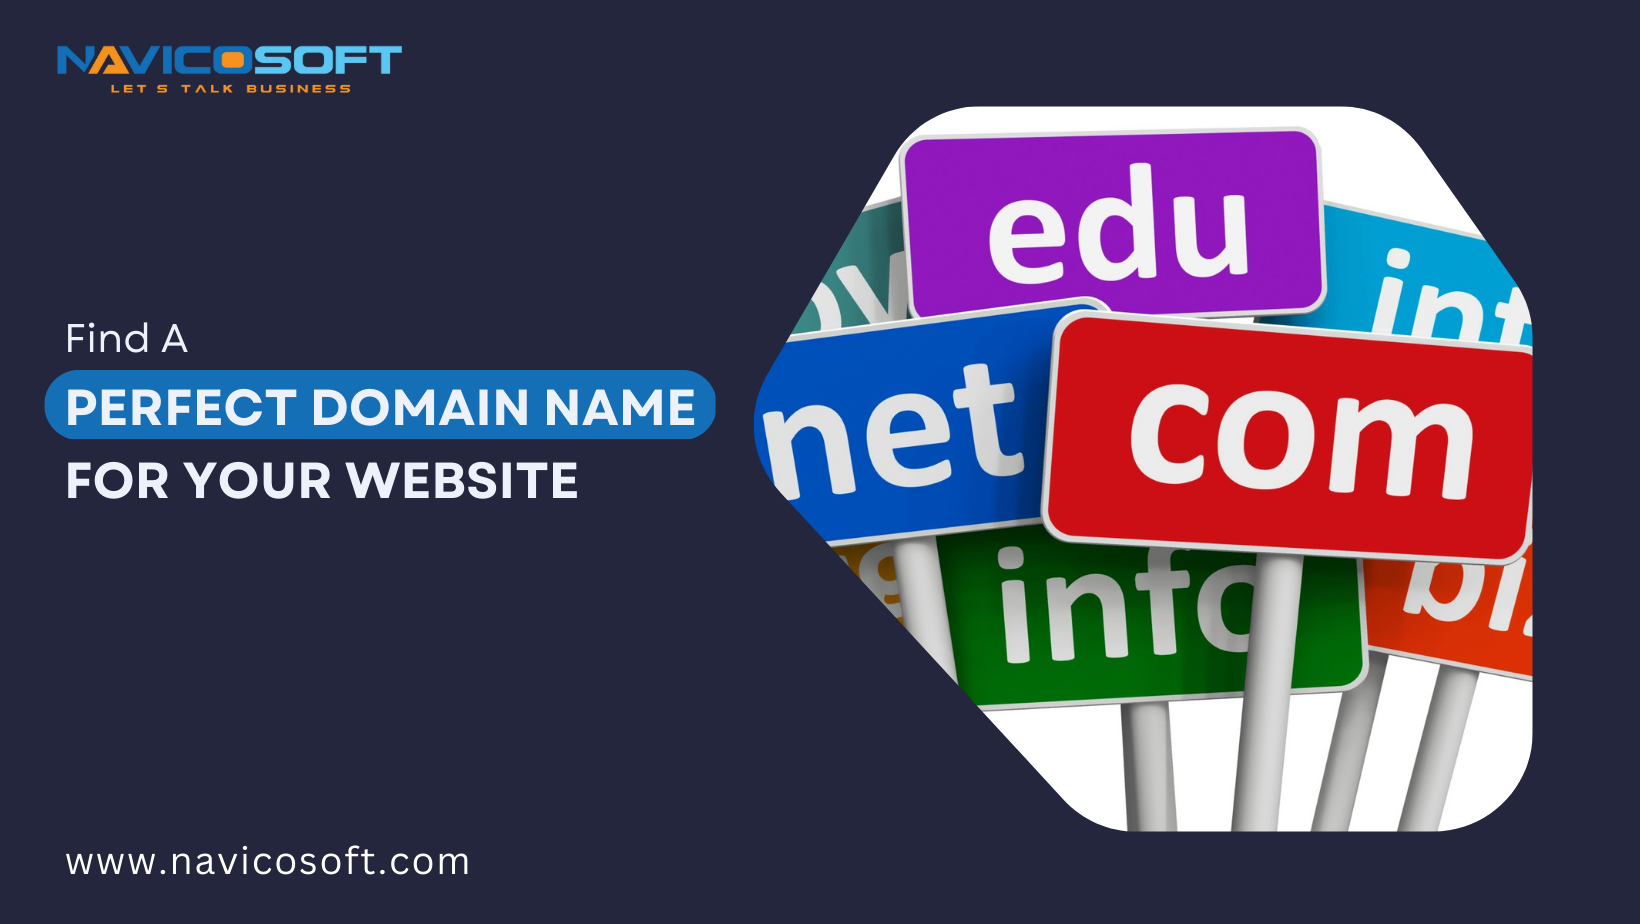 Find a perfect domain name for your website - My Professional Entrepreneur